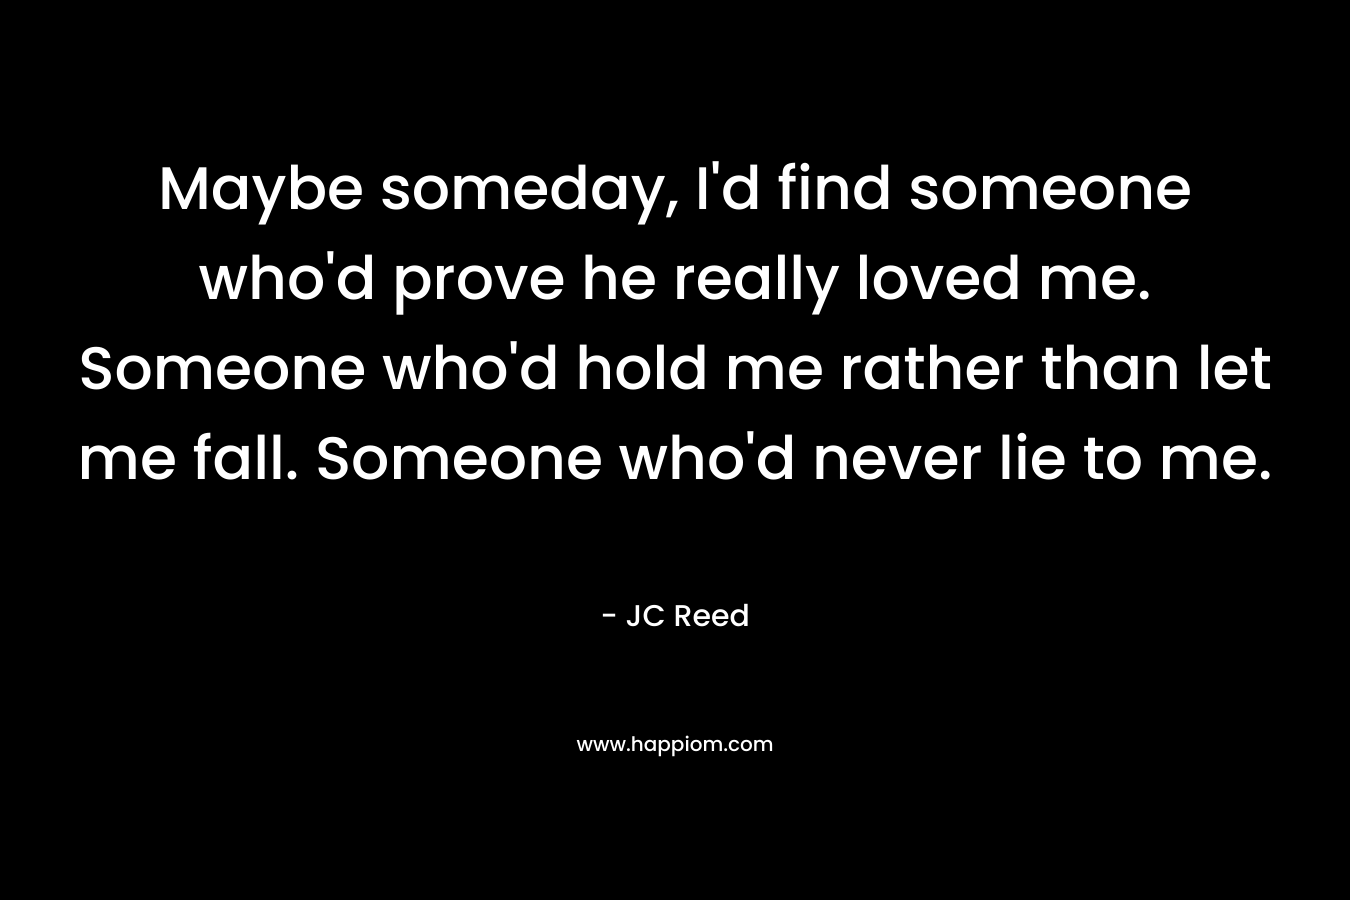 Maybe someday, I'd find someone who'd prove he really loved me. Someone who'd hold me rather than let me fall. Someone who'd never lie to me.